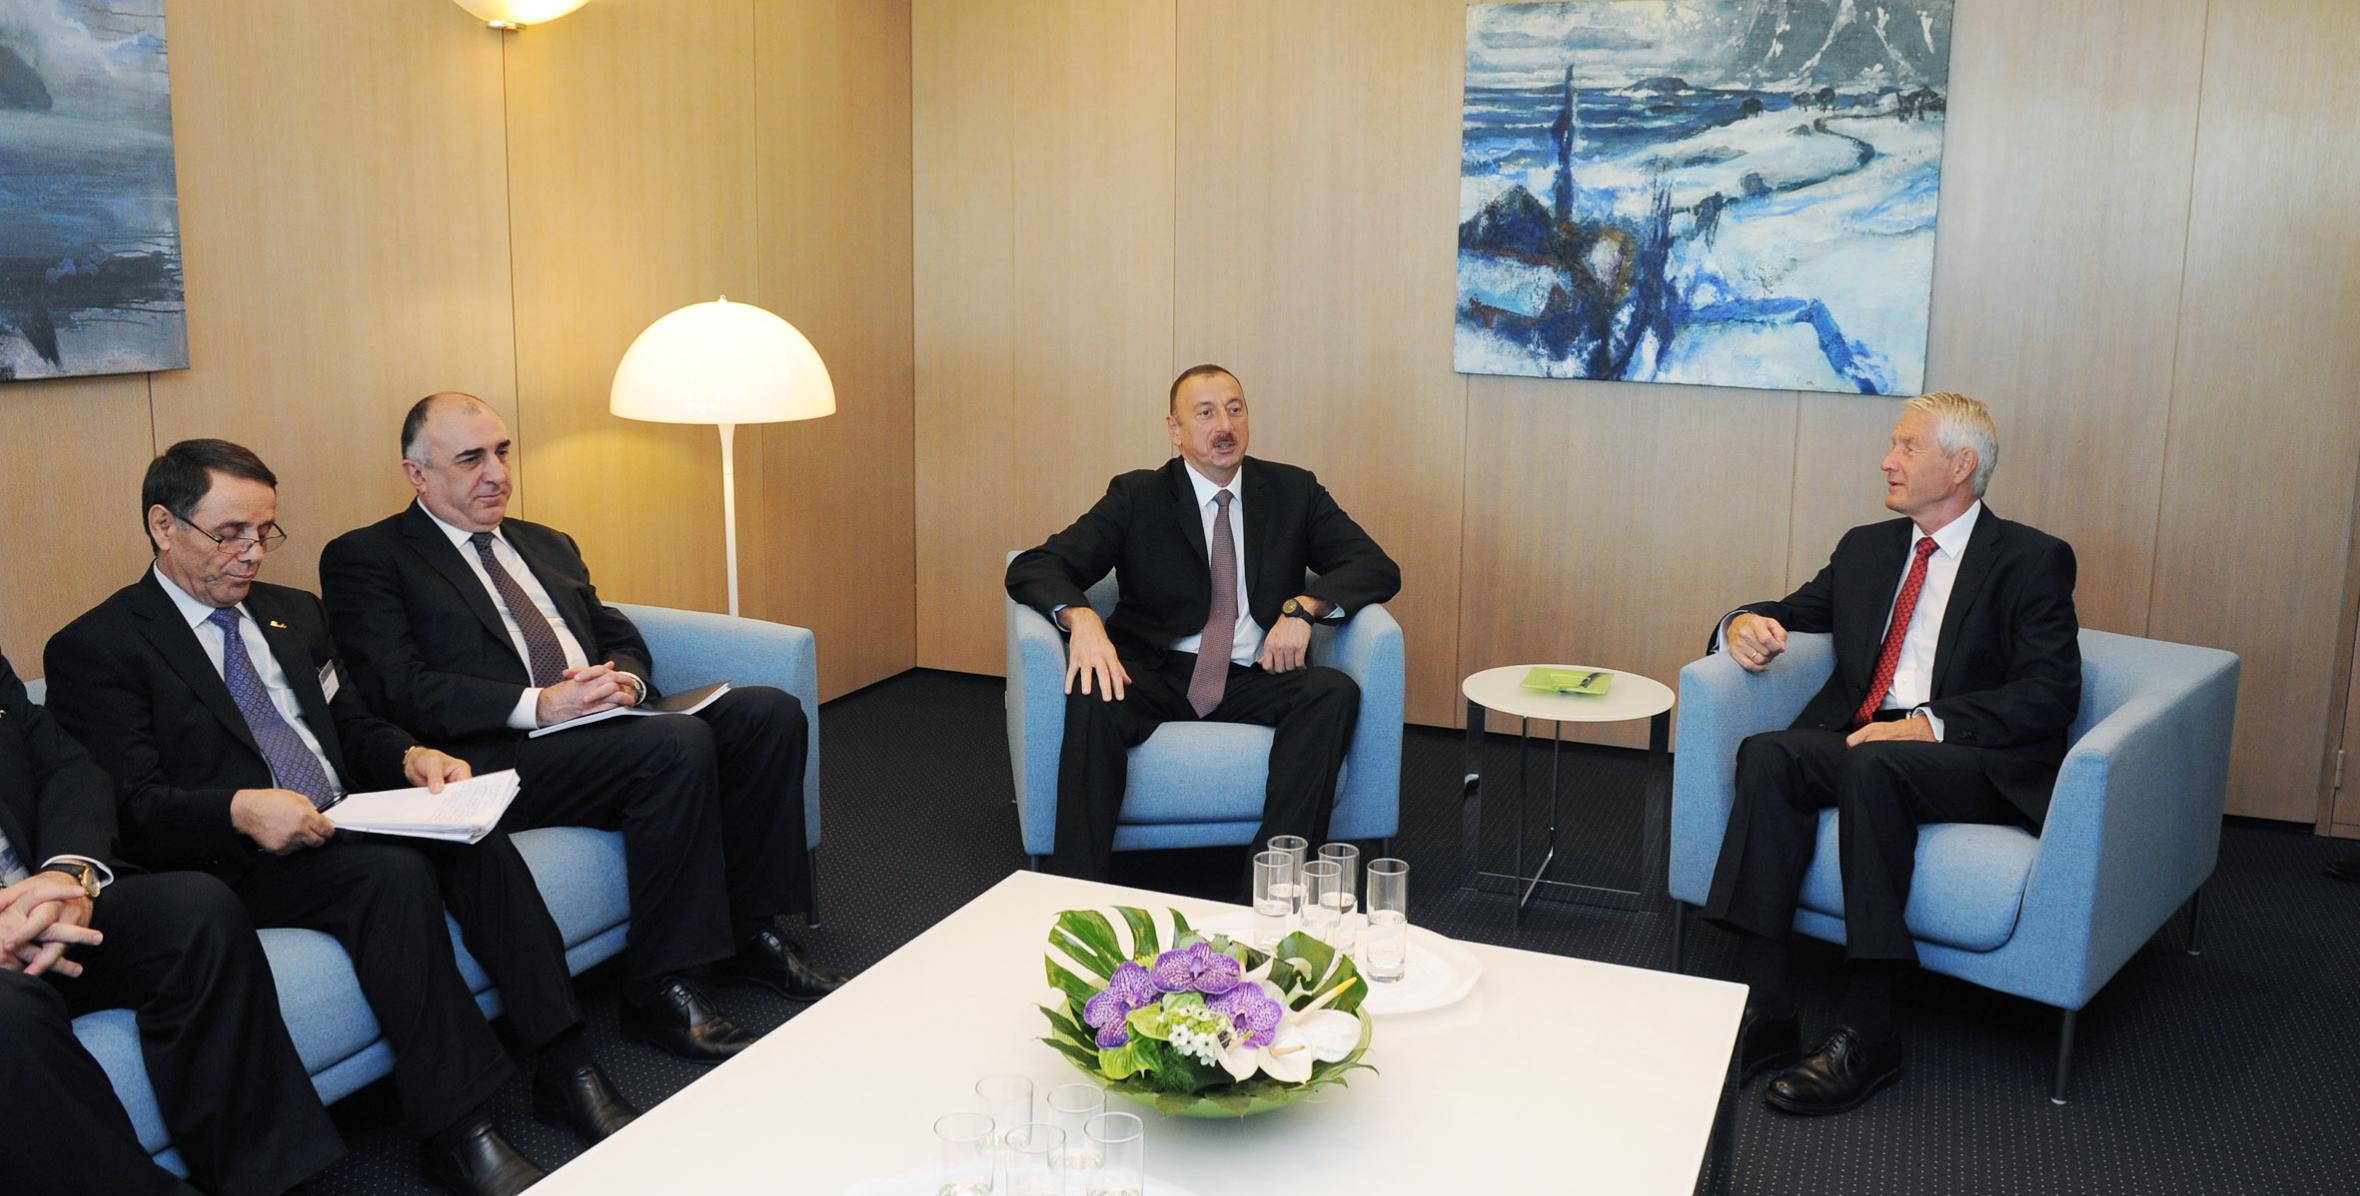 Ilham Aliyev met with Secretary General of the Council of Europe Thorbjørn Jagland